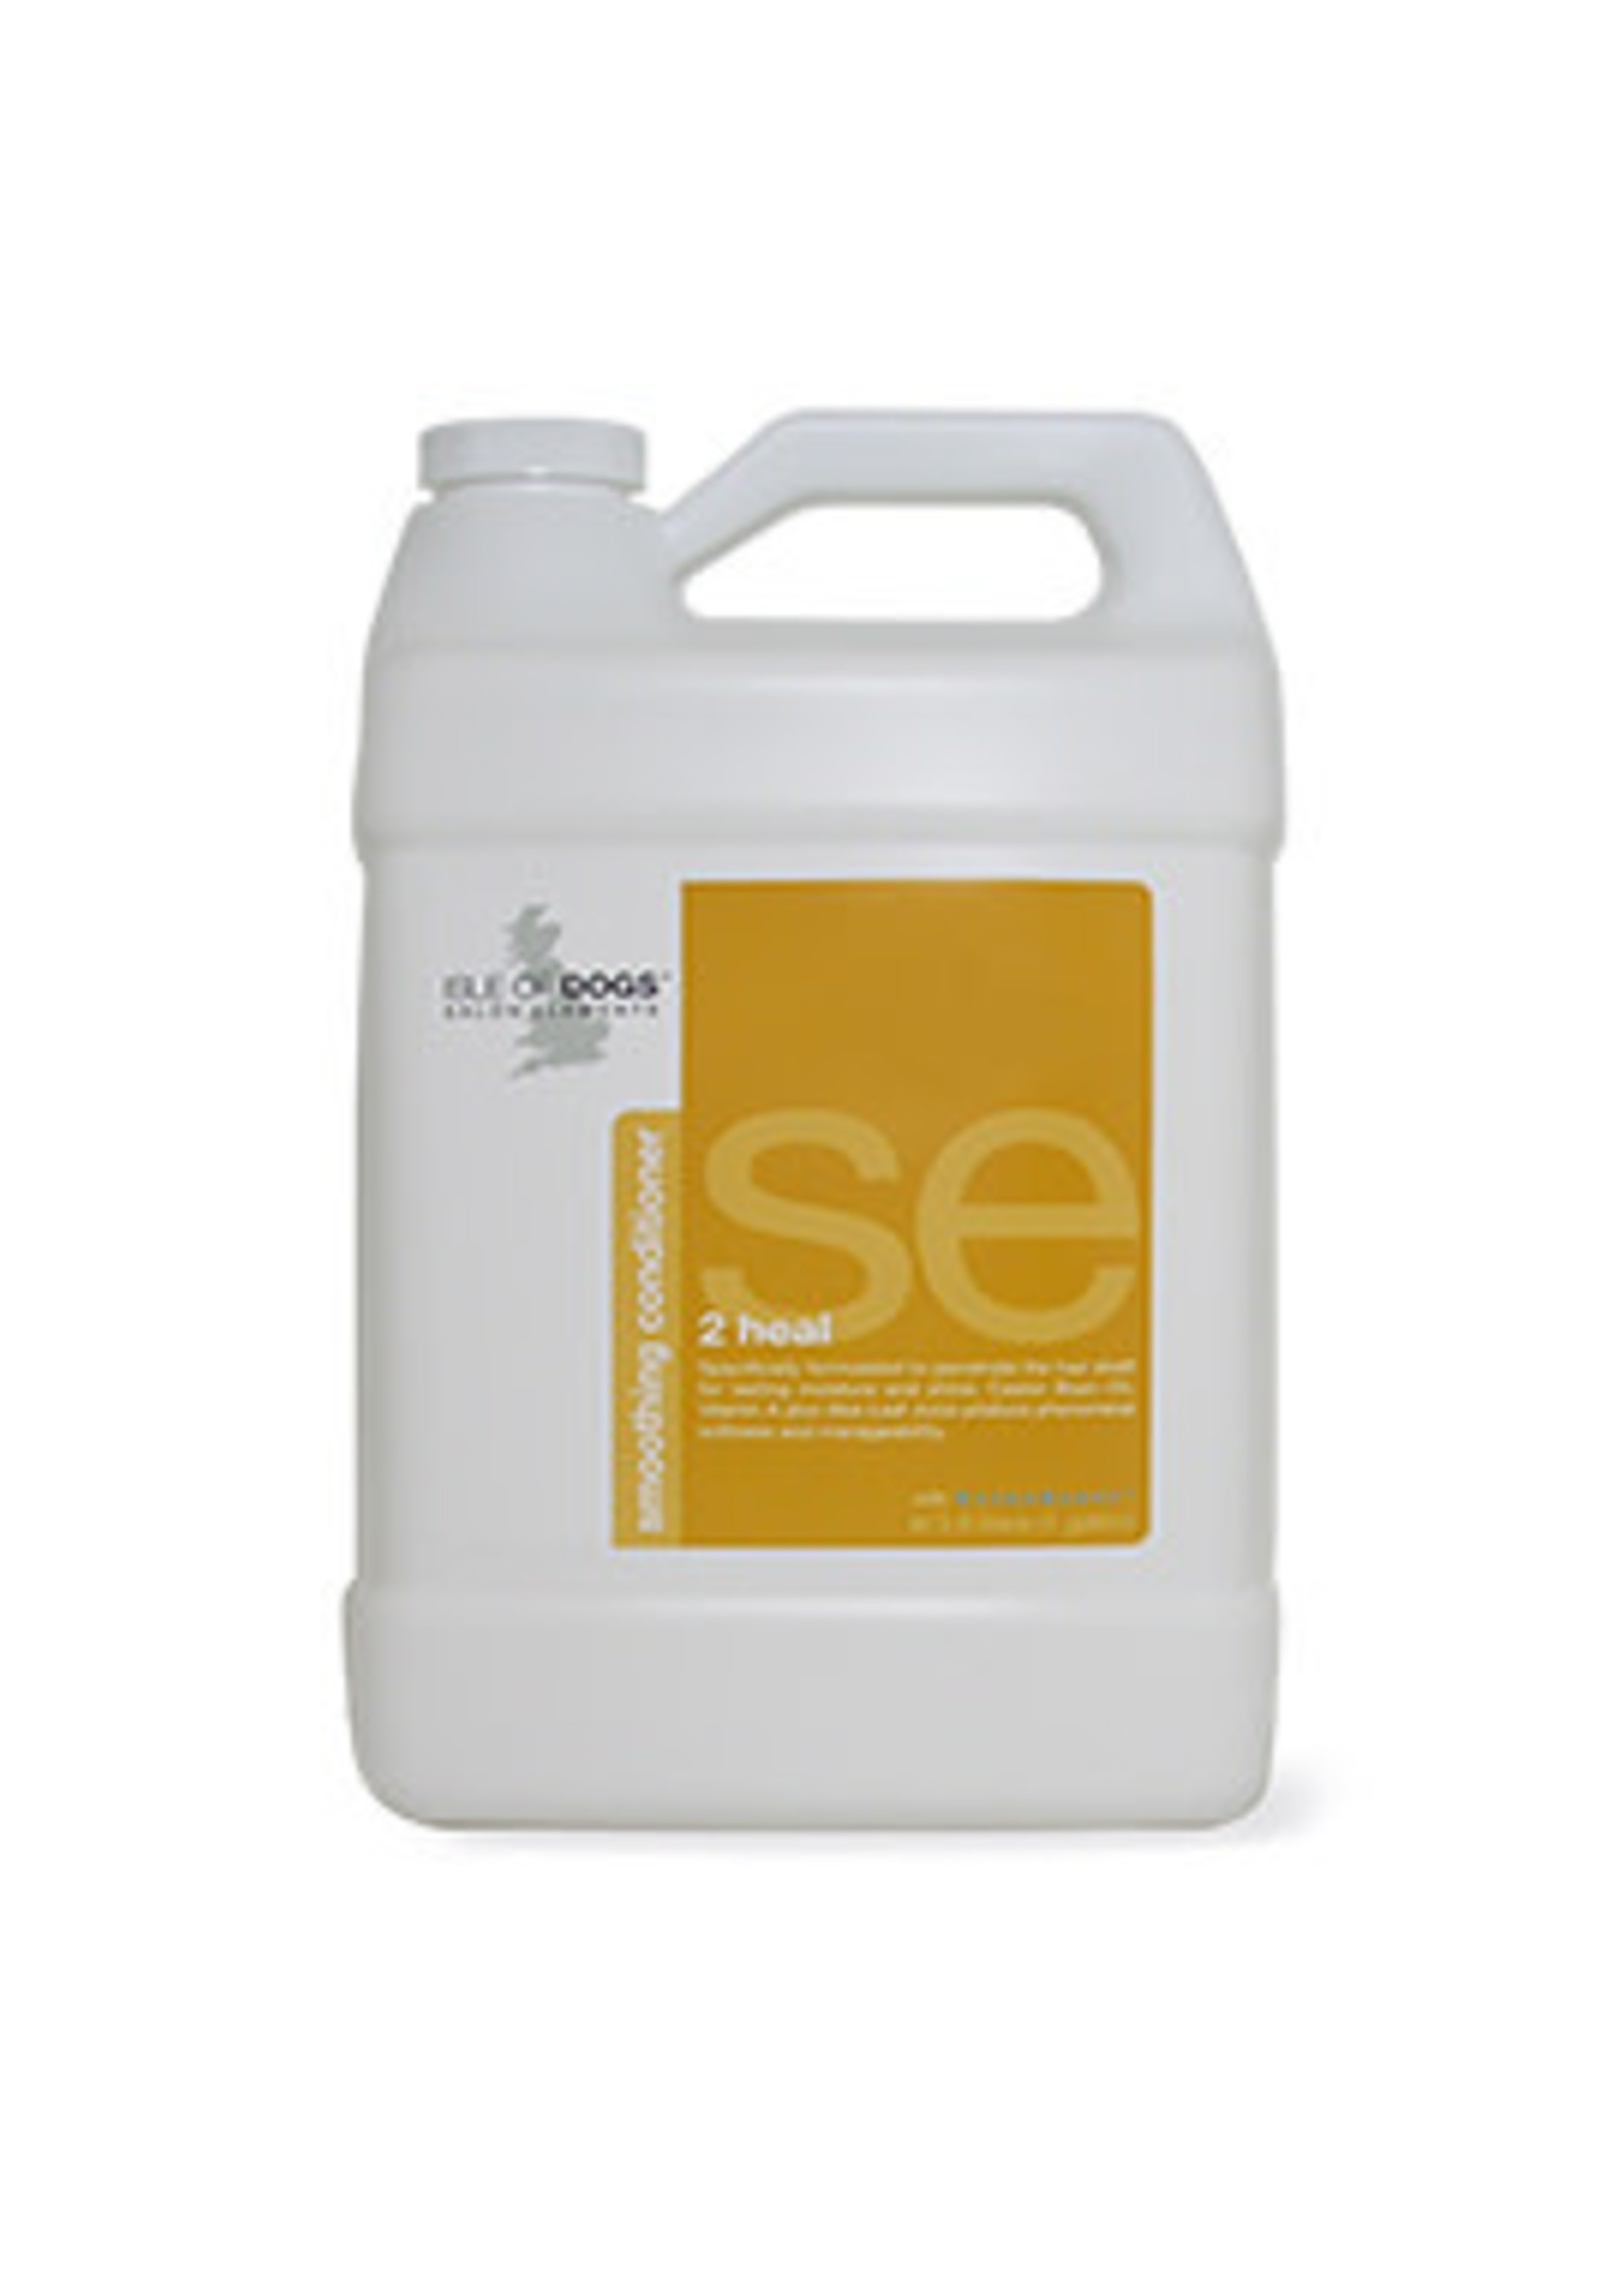 Isle Of Dogs Isle Of Dogs 2 Heal Conditioner Gallon